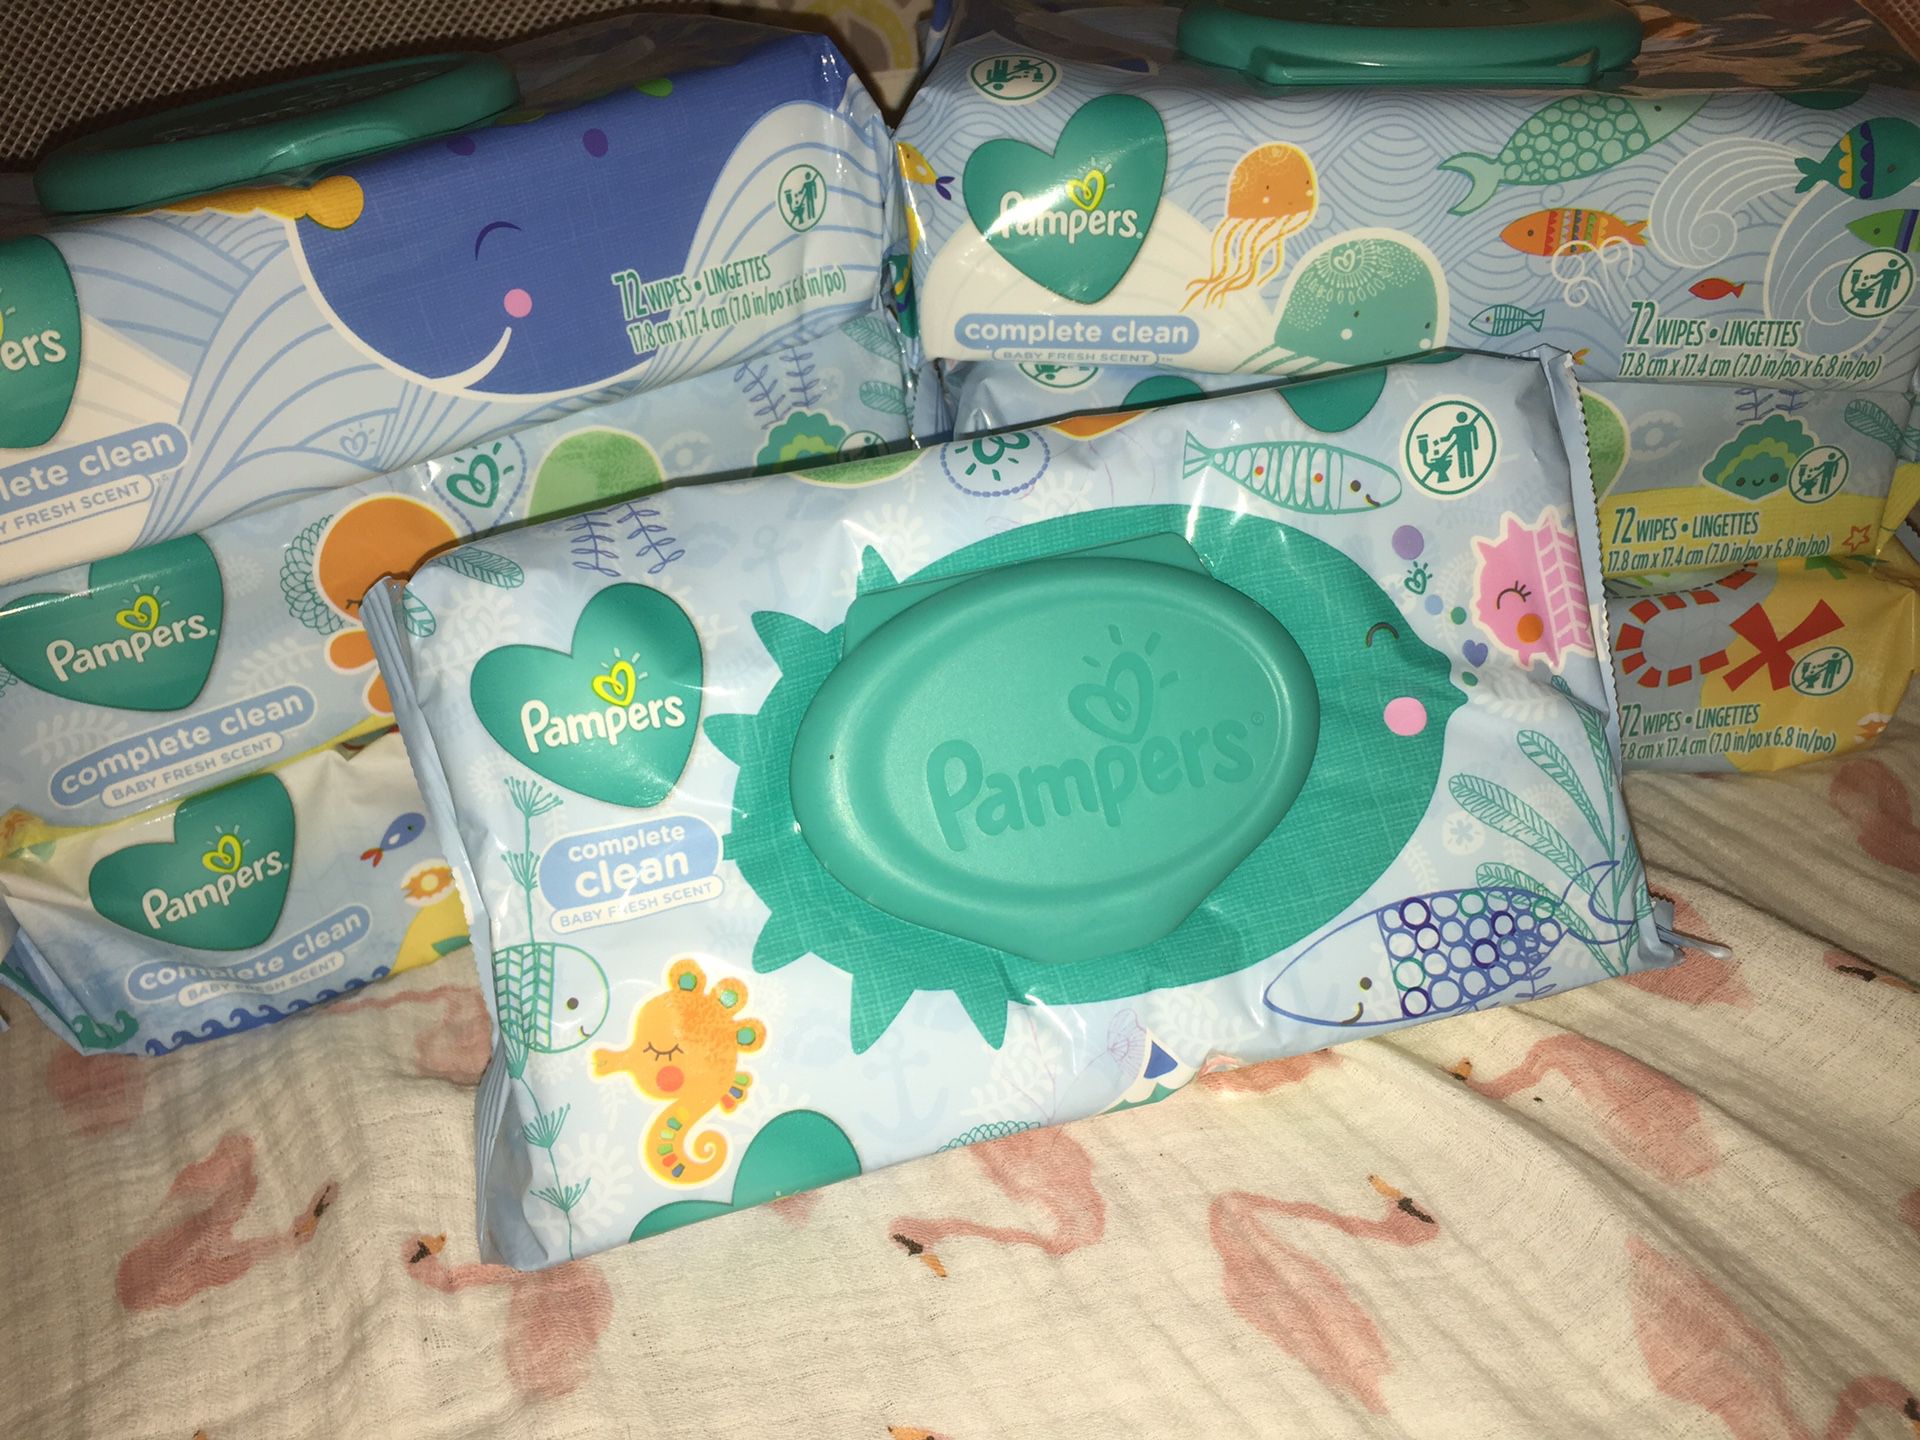 Pampers Extra Strong Wipes